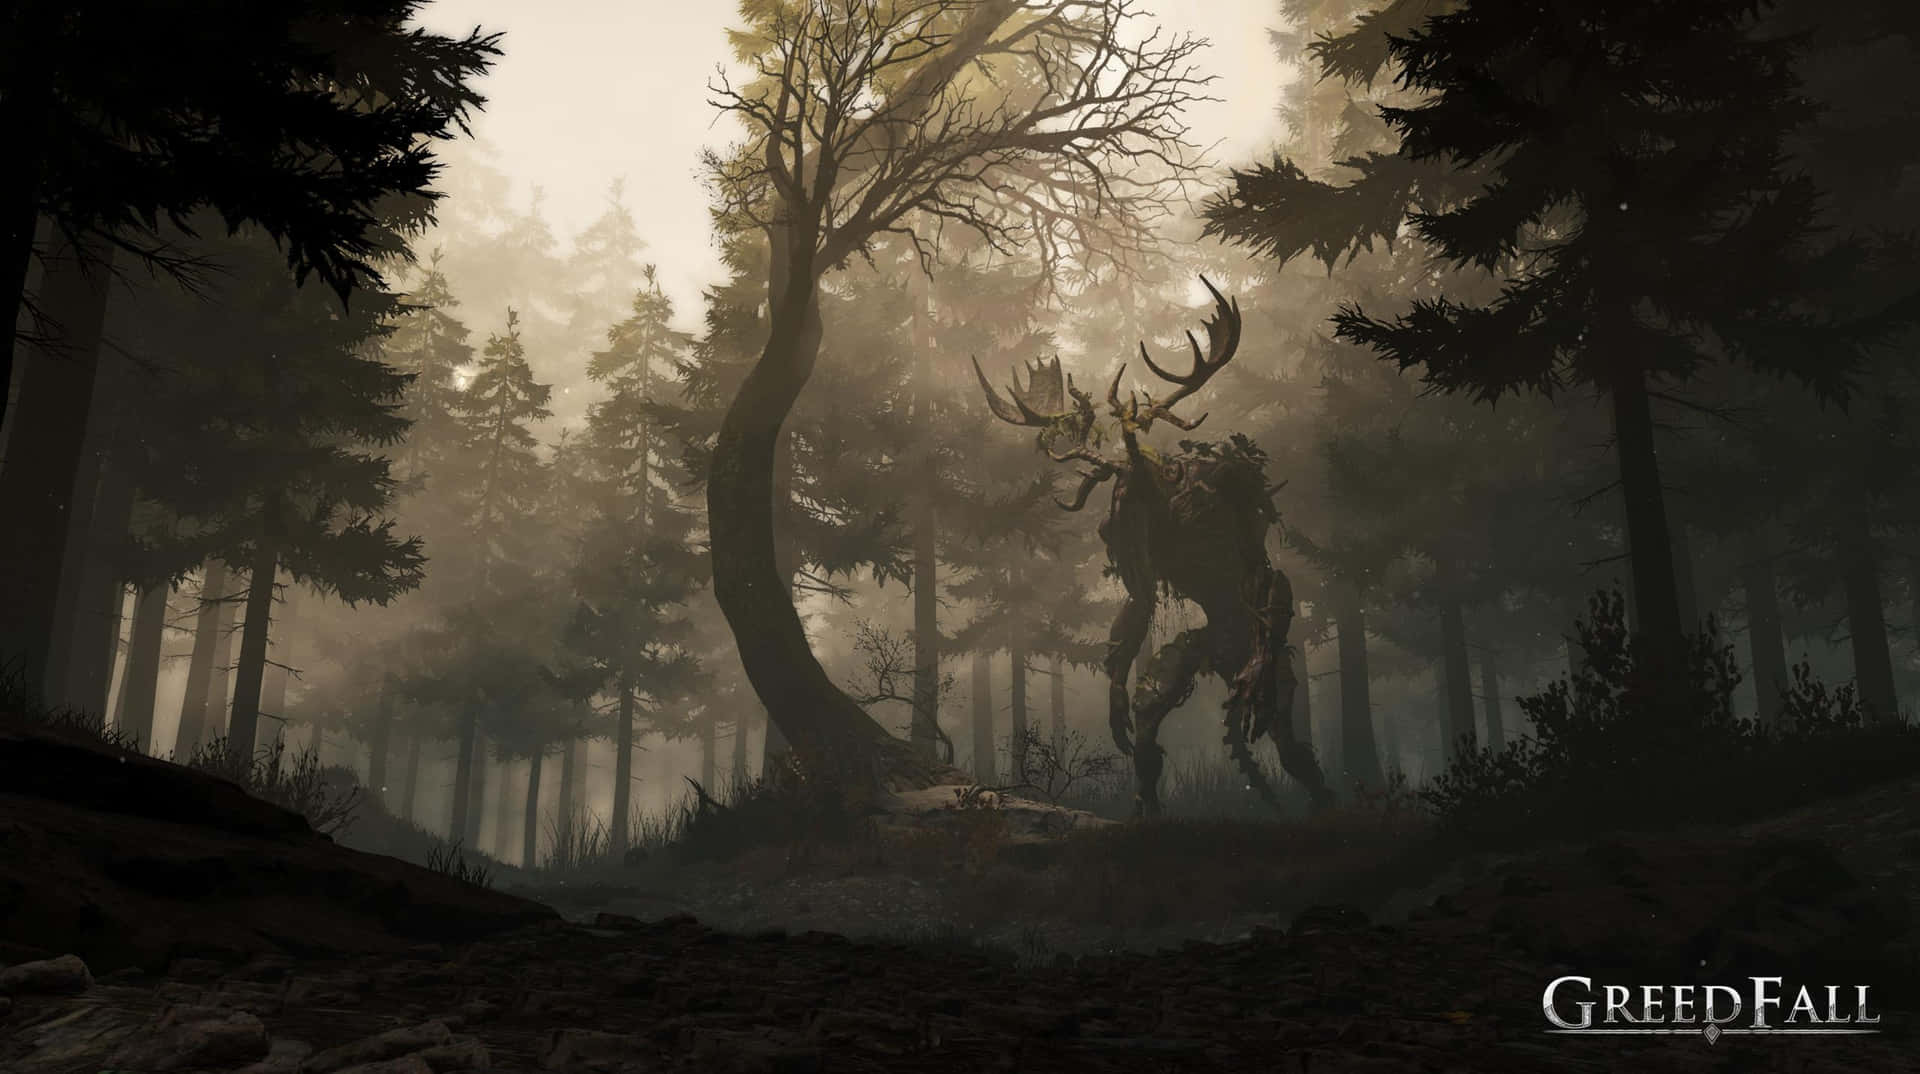 Hd Greedfall Background Mutant Deer In A Forest Wallpaper